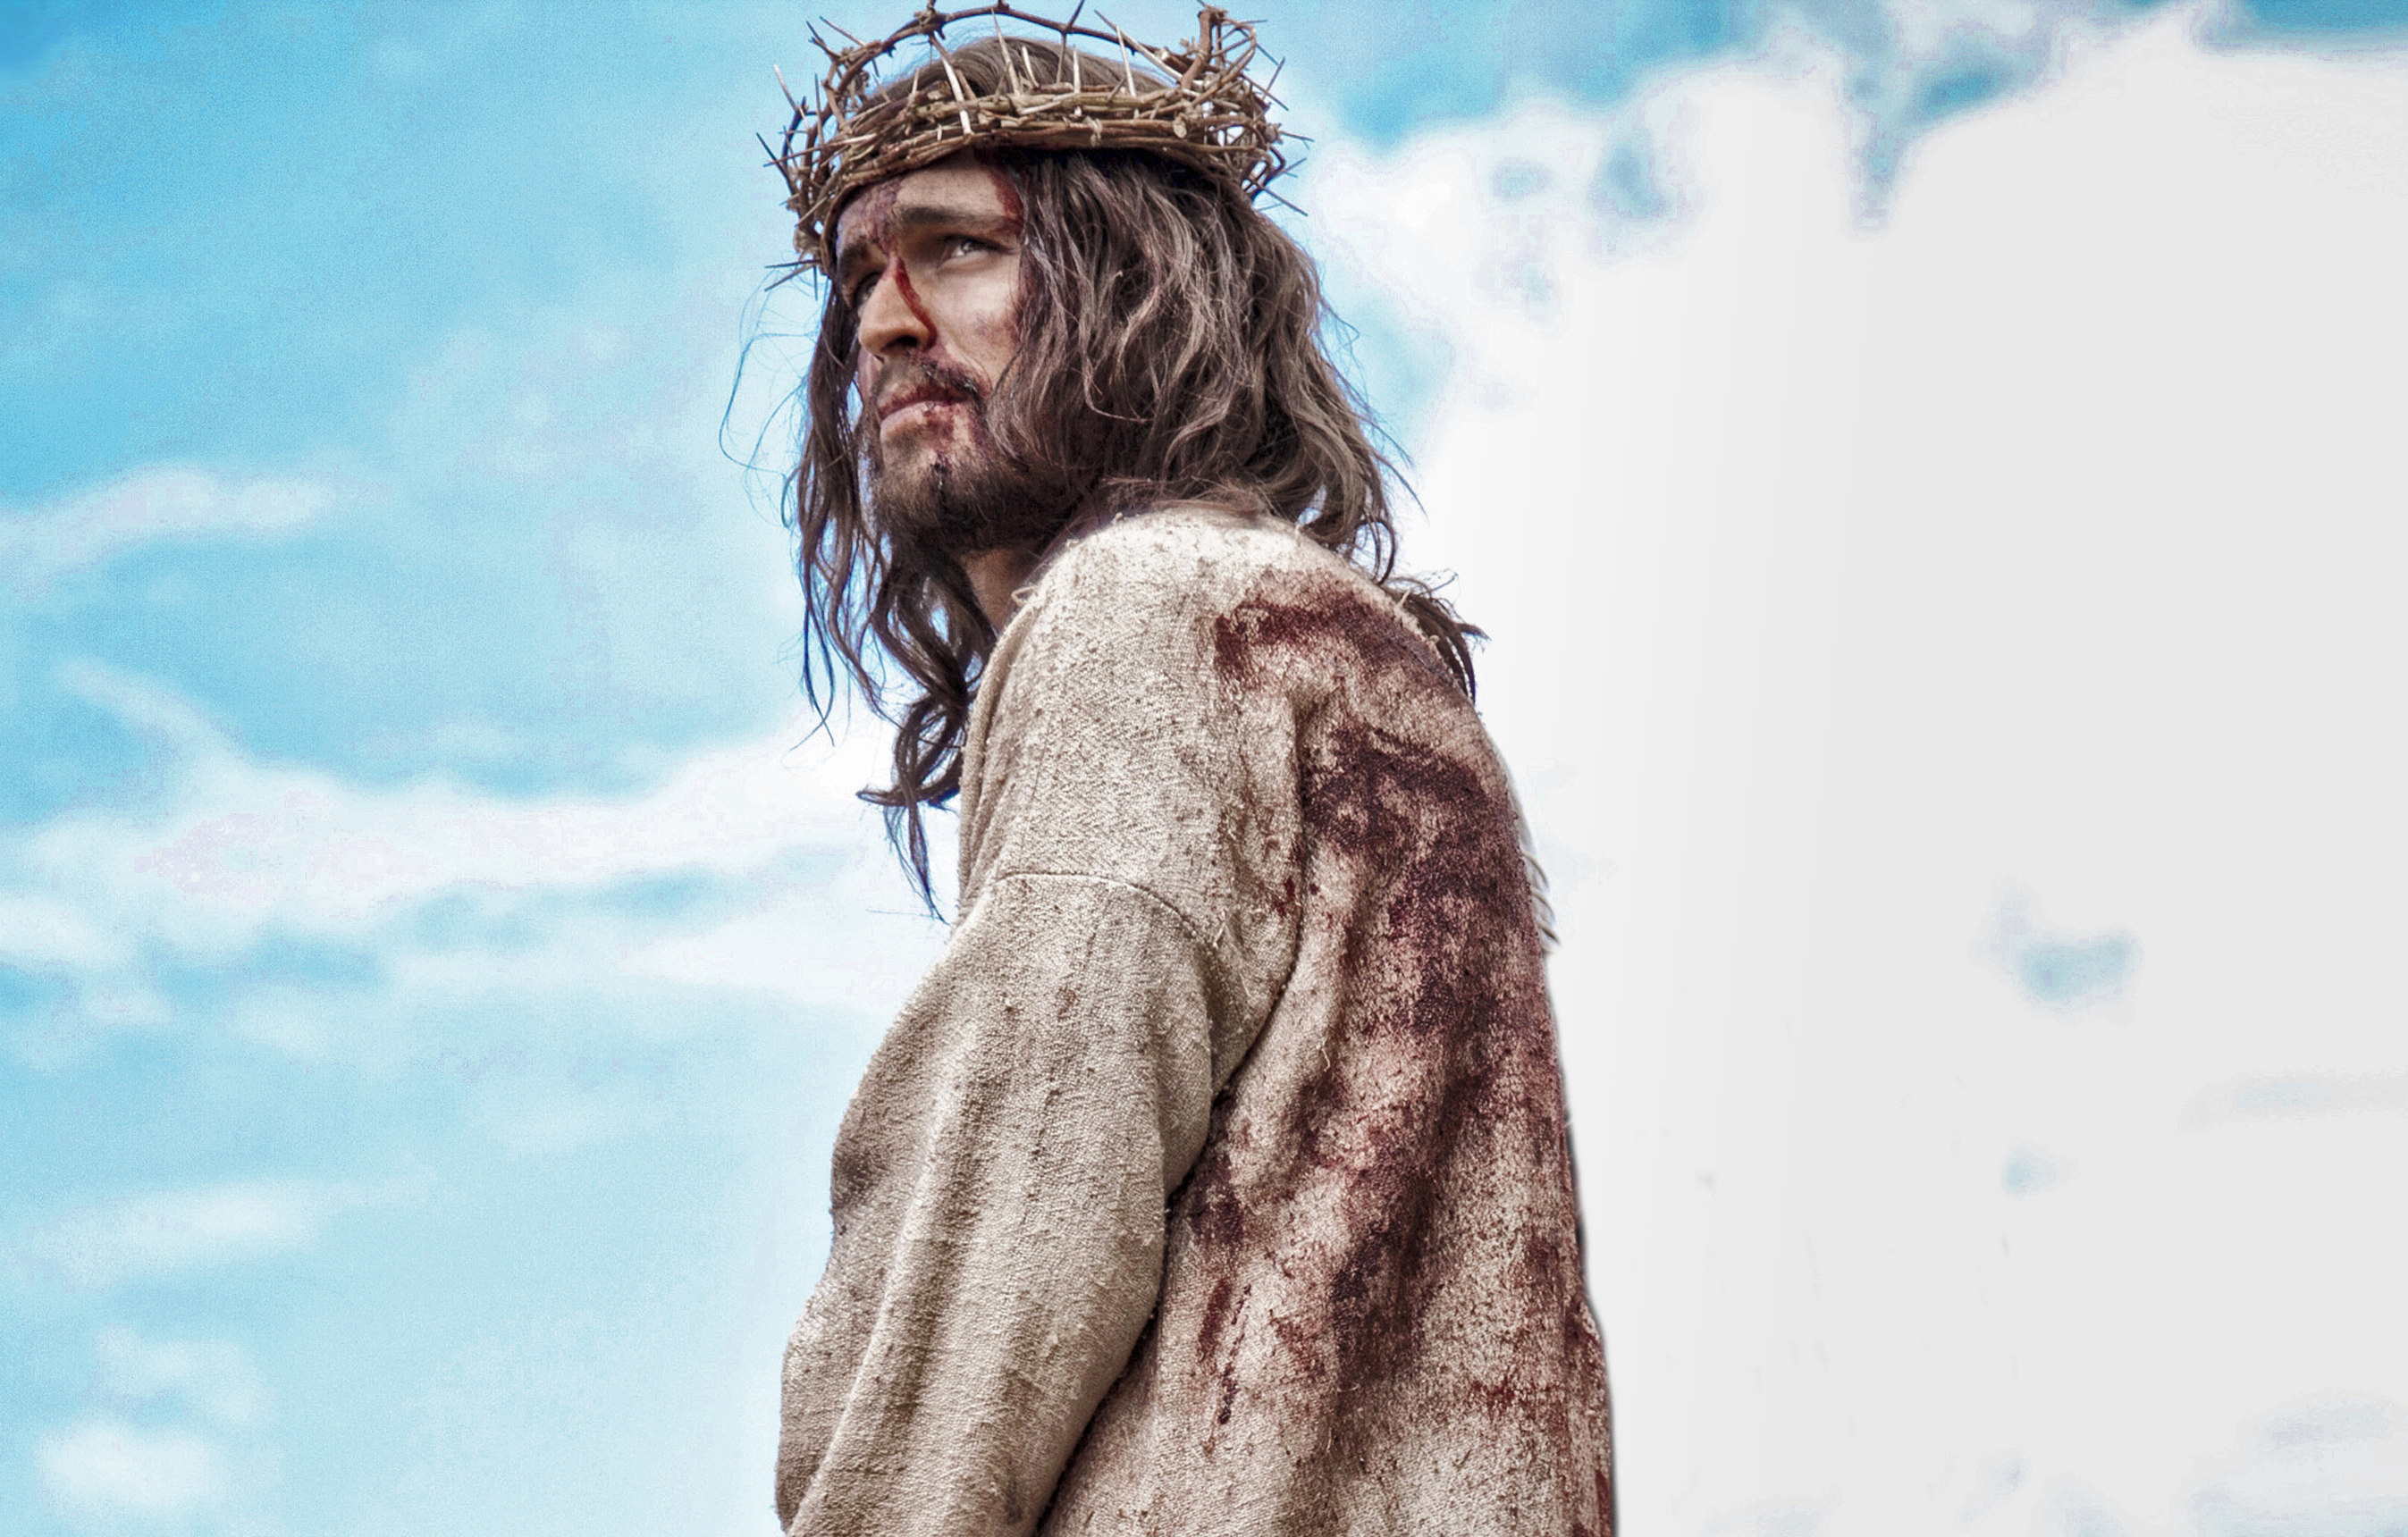 Son Of God wallpapers, Movie, HQ Son Of God pictures 4K Wallpapers 2019